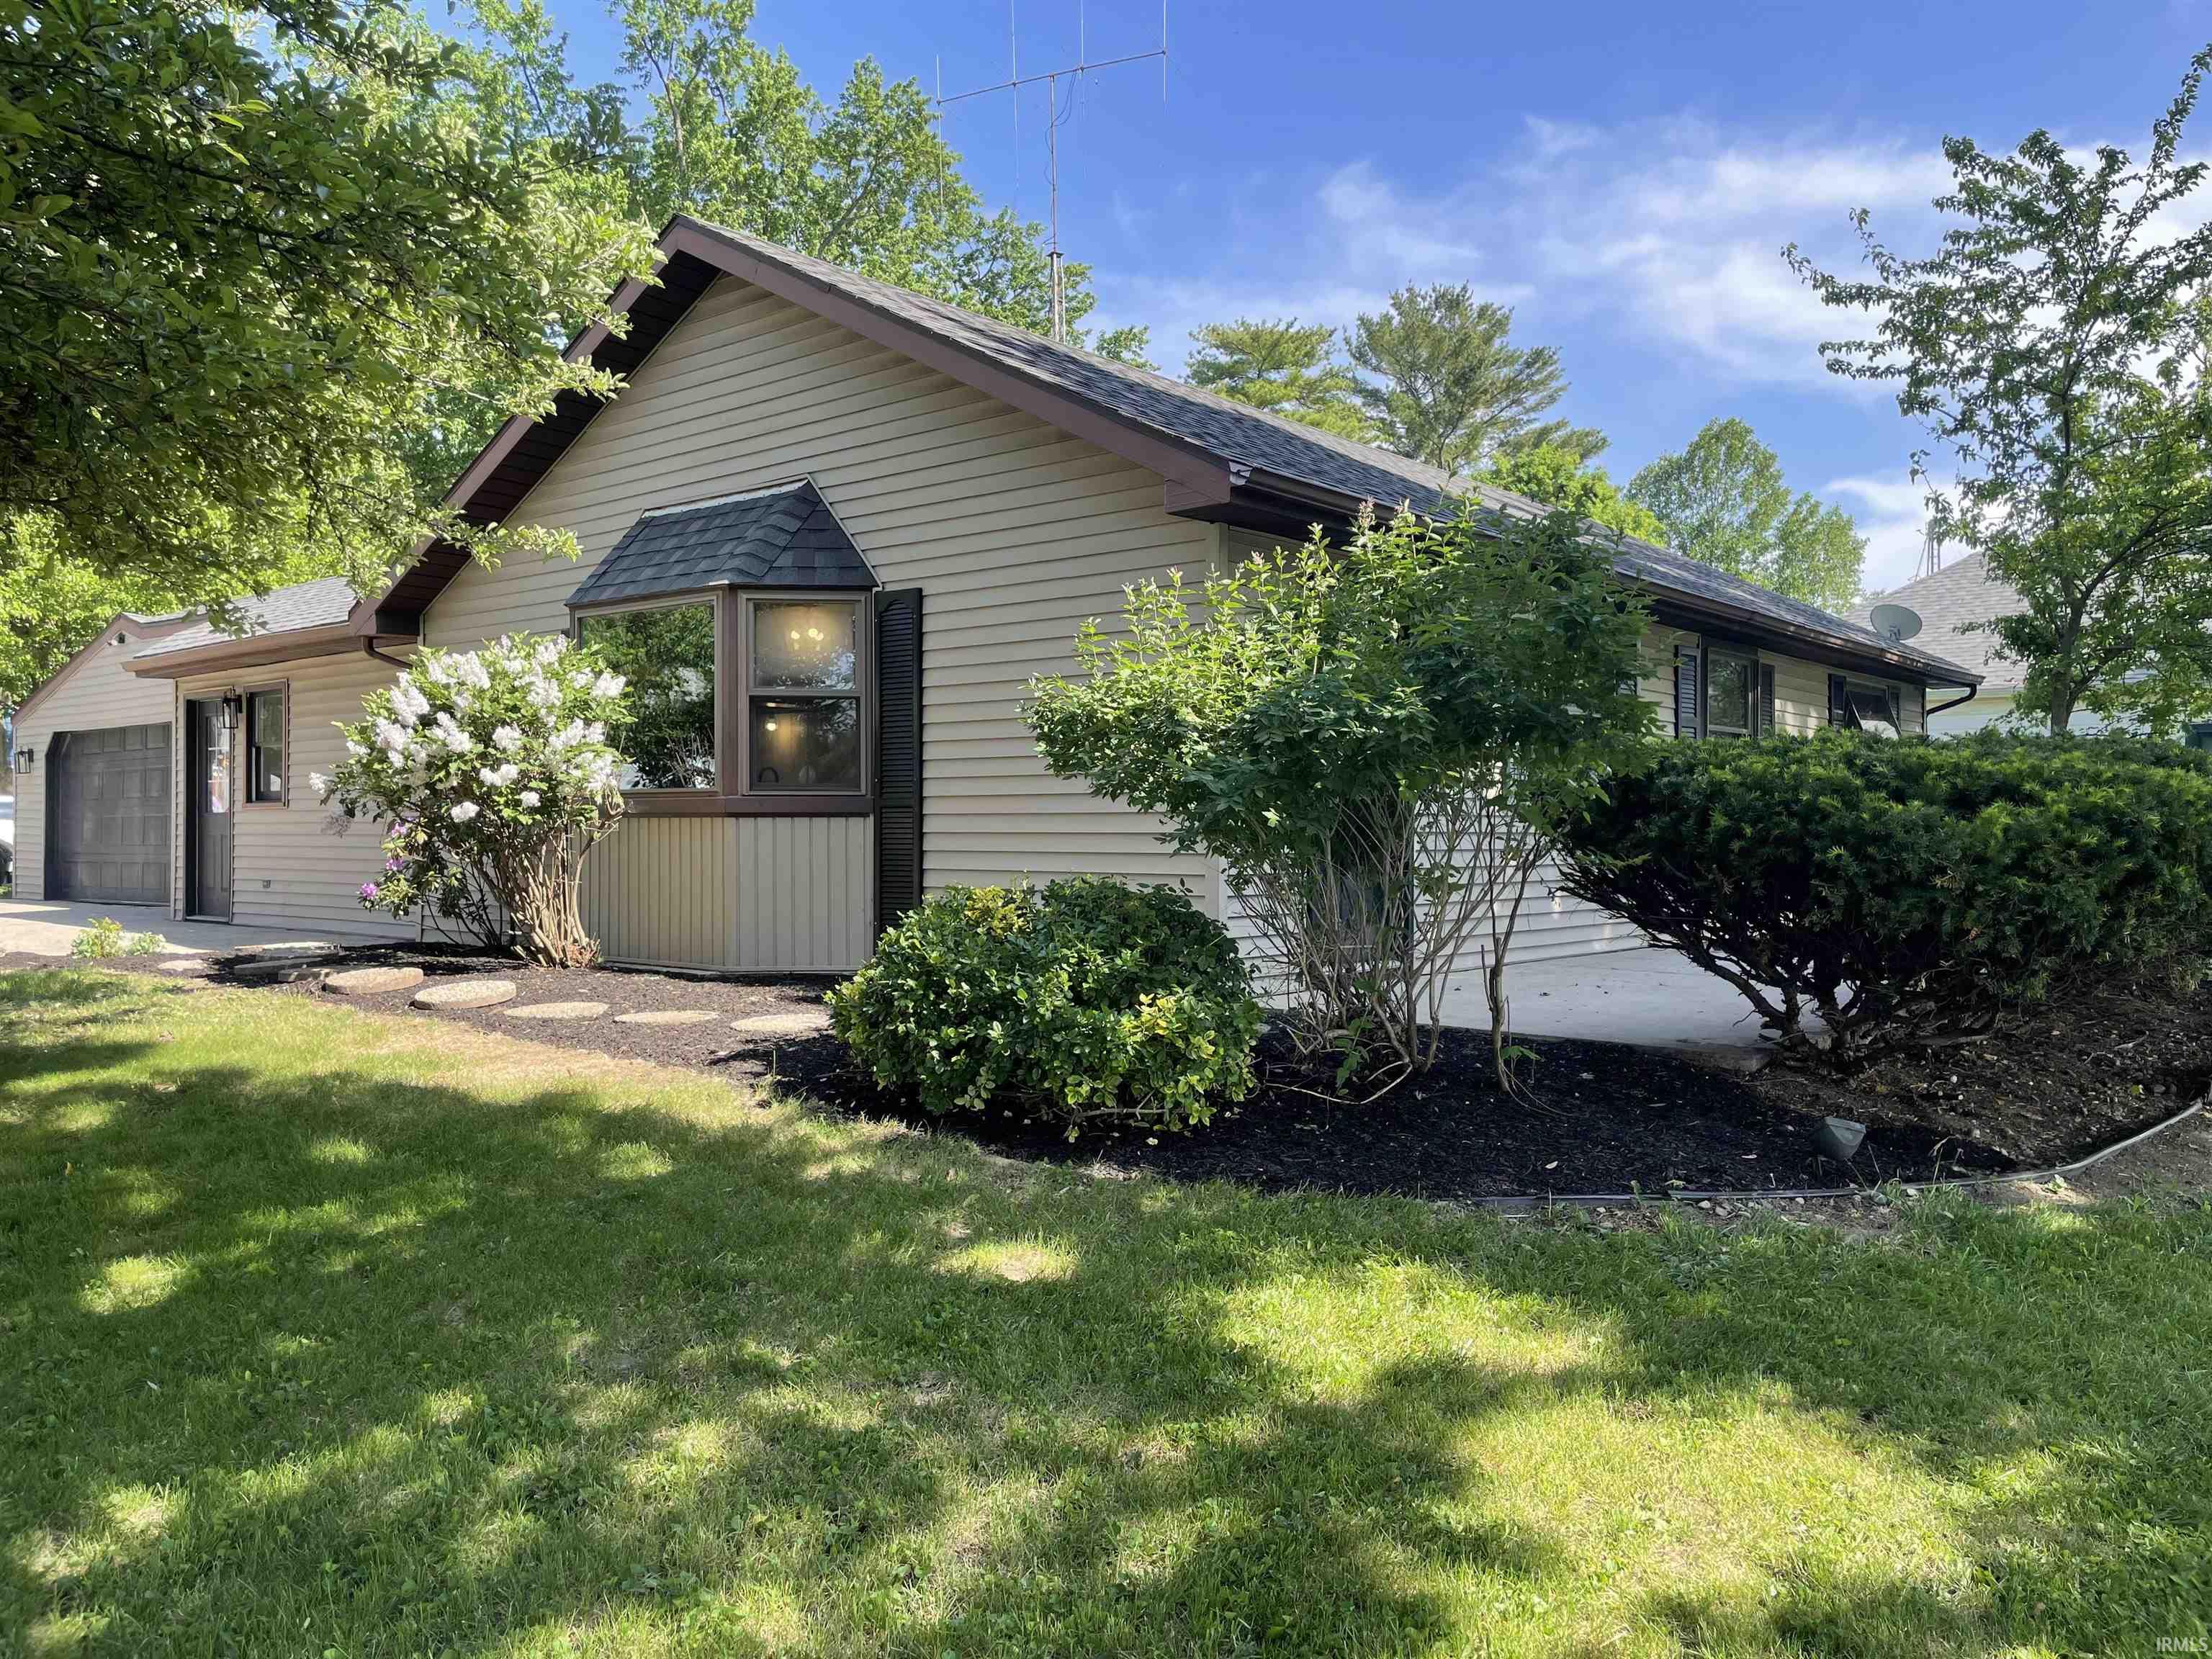 Cute house on corner lot with 3 bedrooms, 1 full bath, large yard, and 2 car garage. Lots of new updates (Floring, bathroom, kitchen, paint, and hardware). Also, new roof! With all of the updates this home is move in ready!